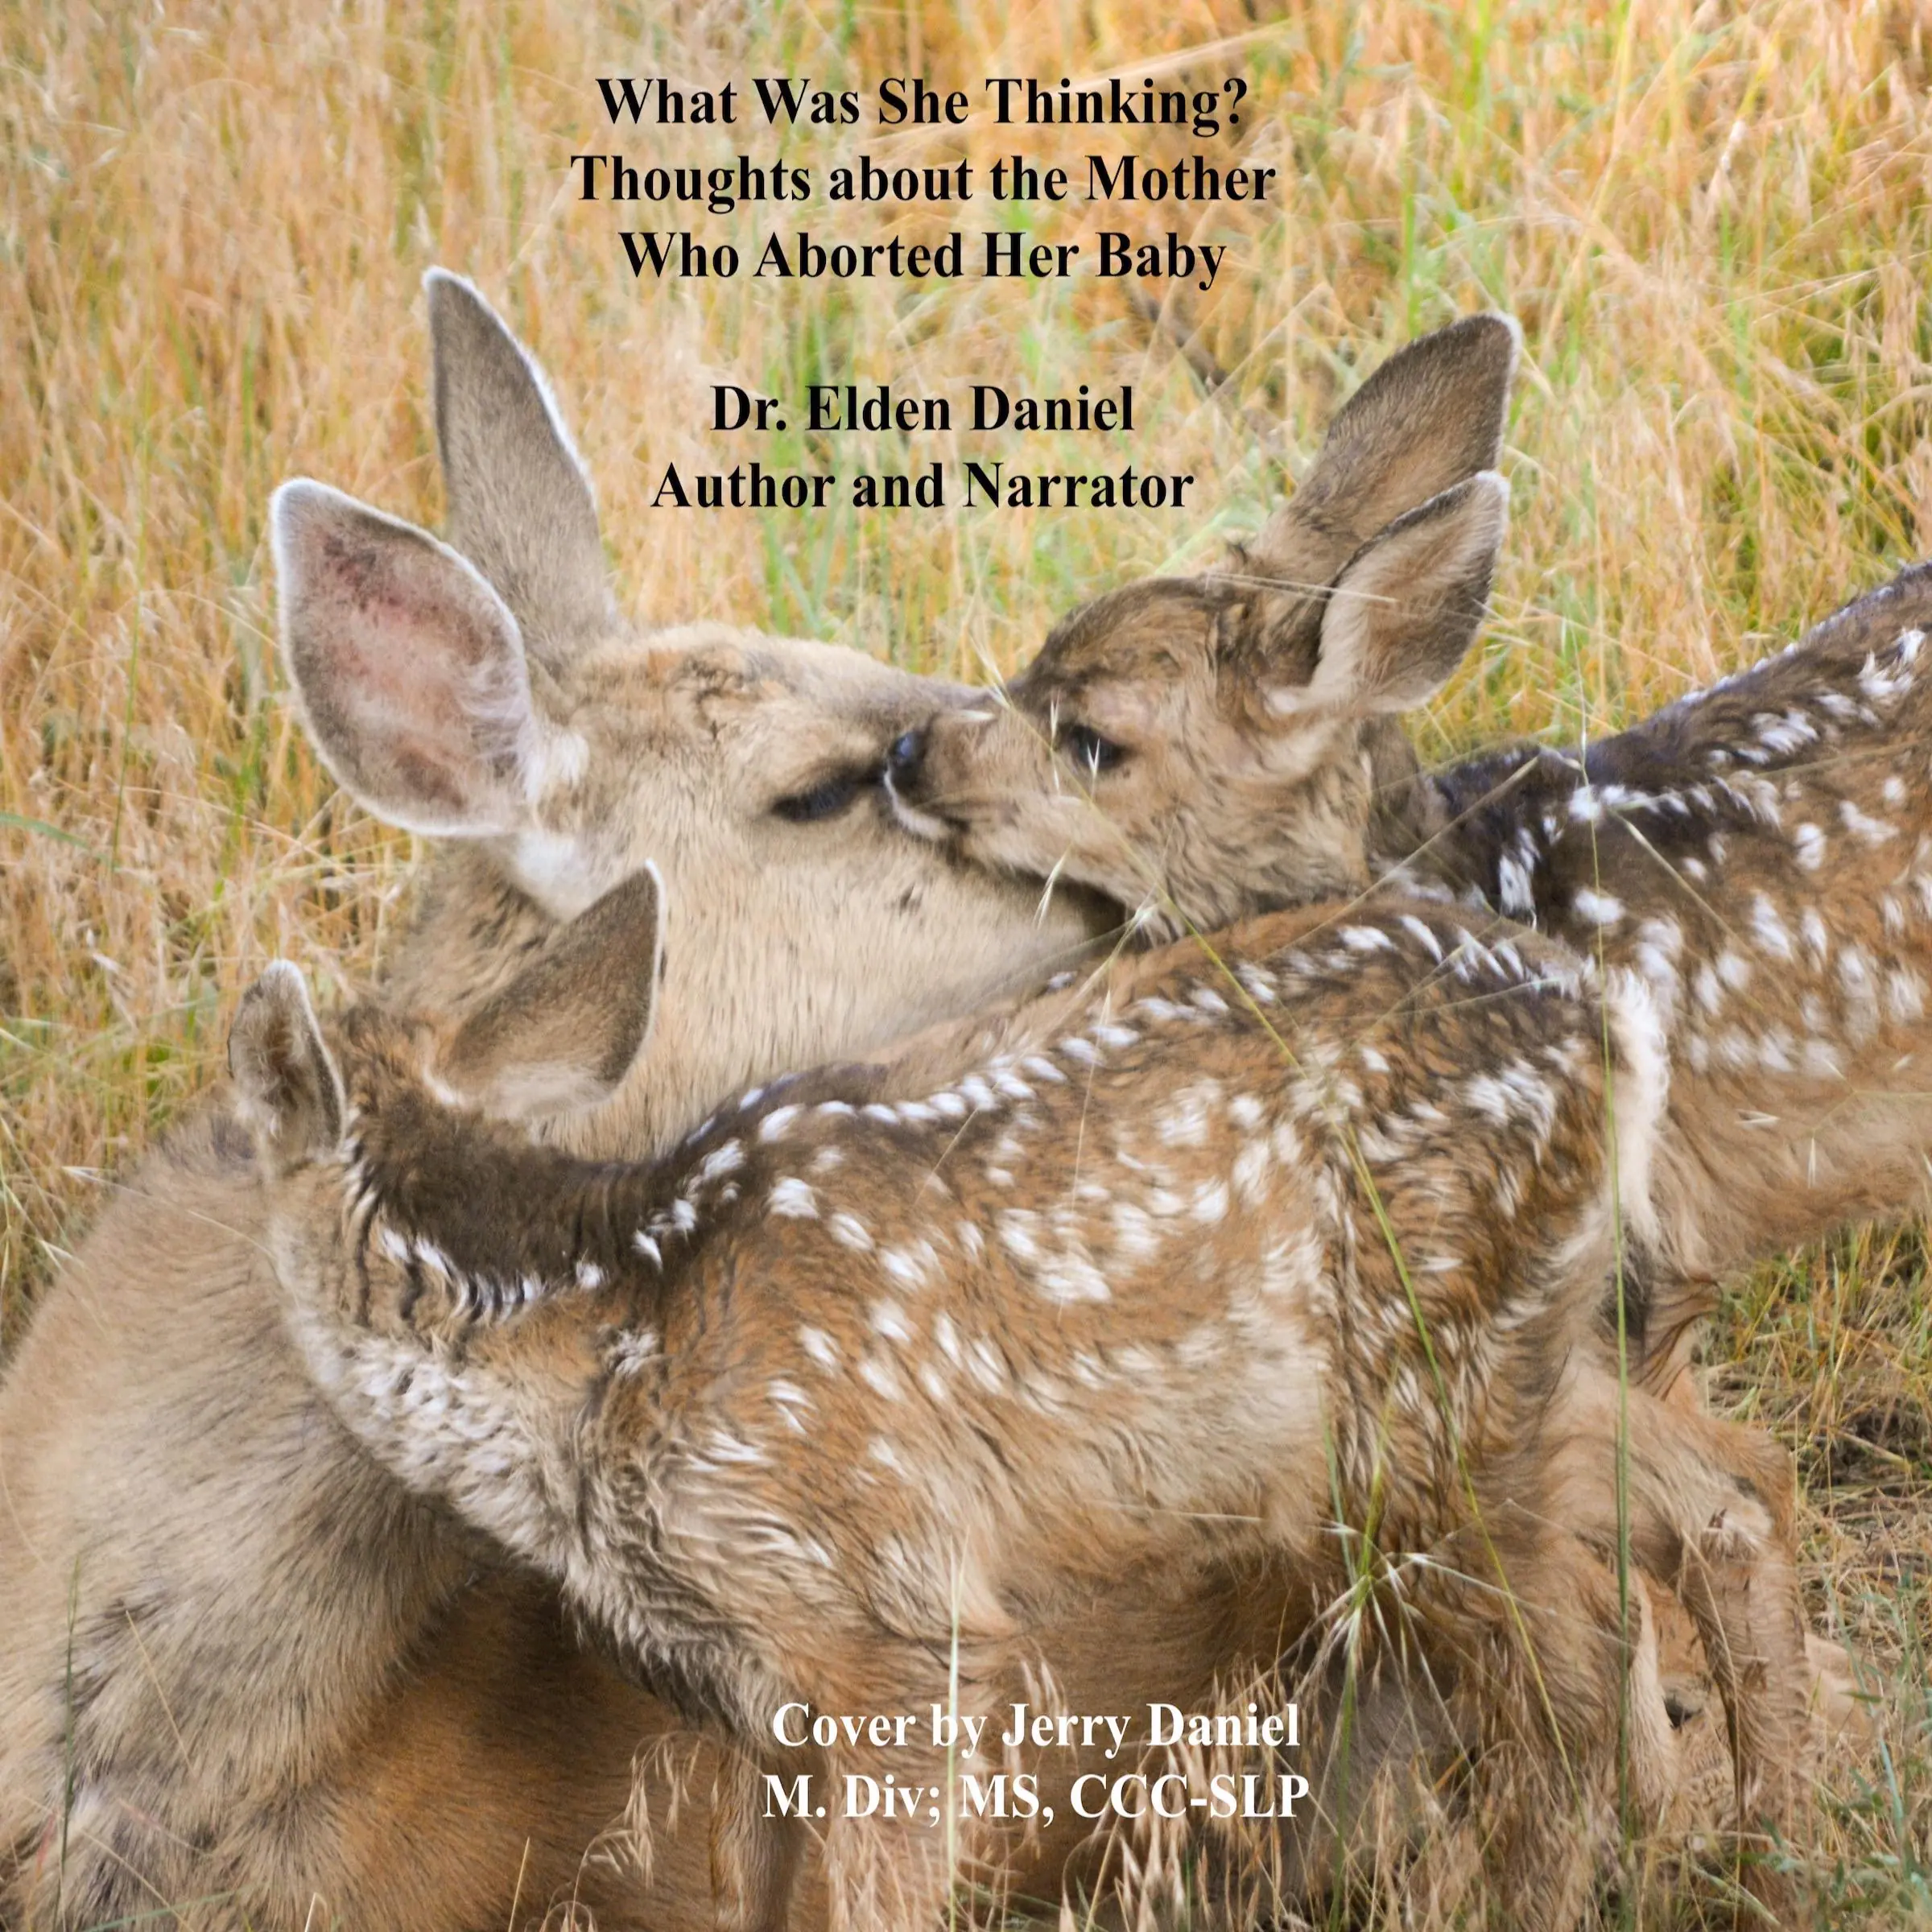 What Was She Thinking by Dr. Elden Daniel Audiobook